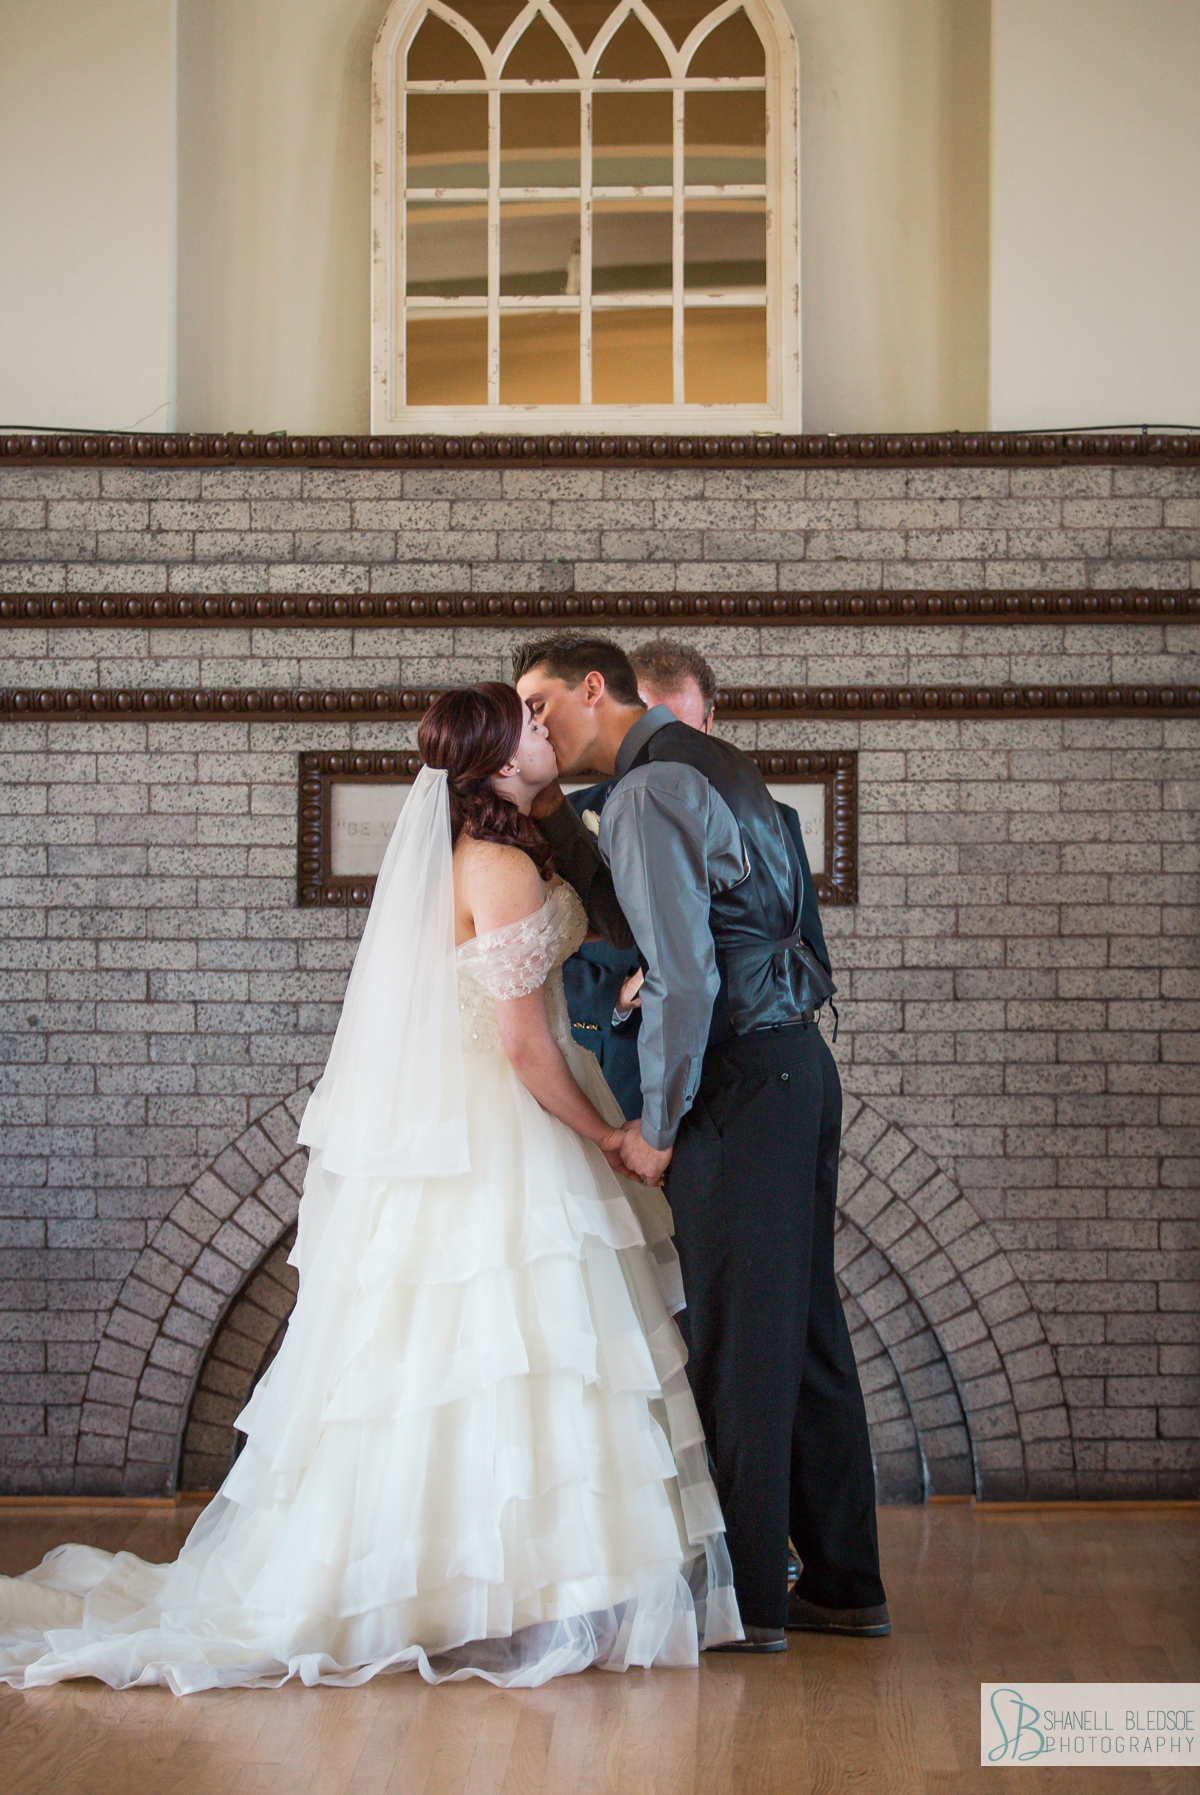 kiss wedding ceremony at historic southern railway station in knoxville